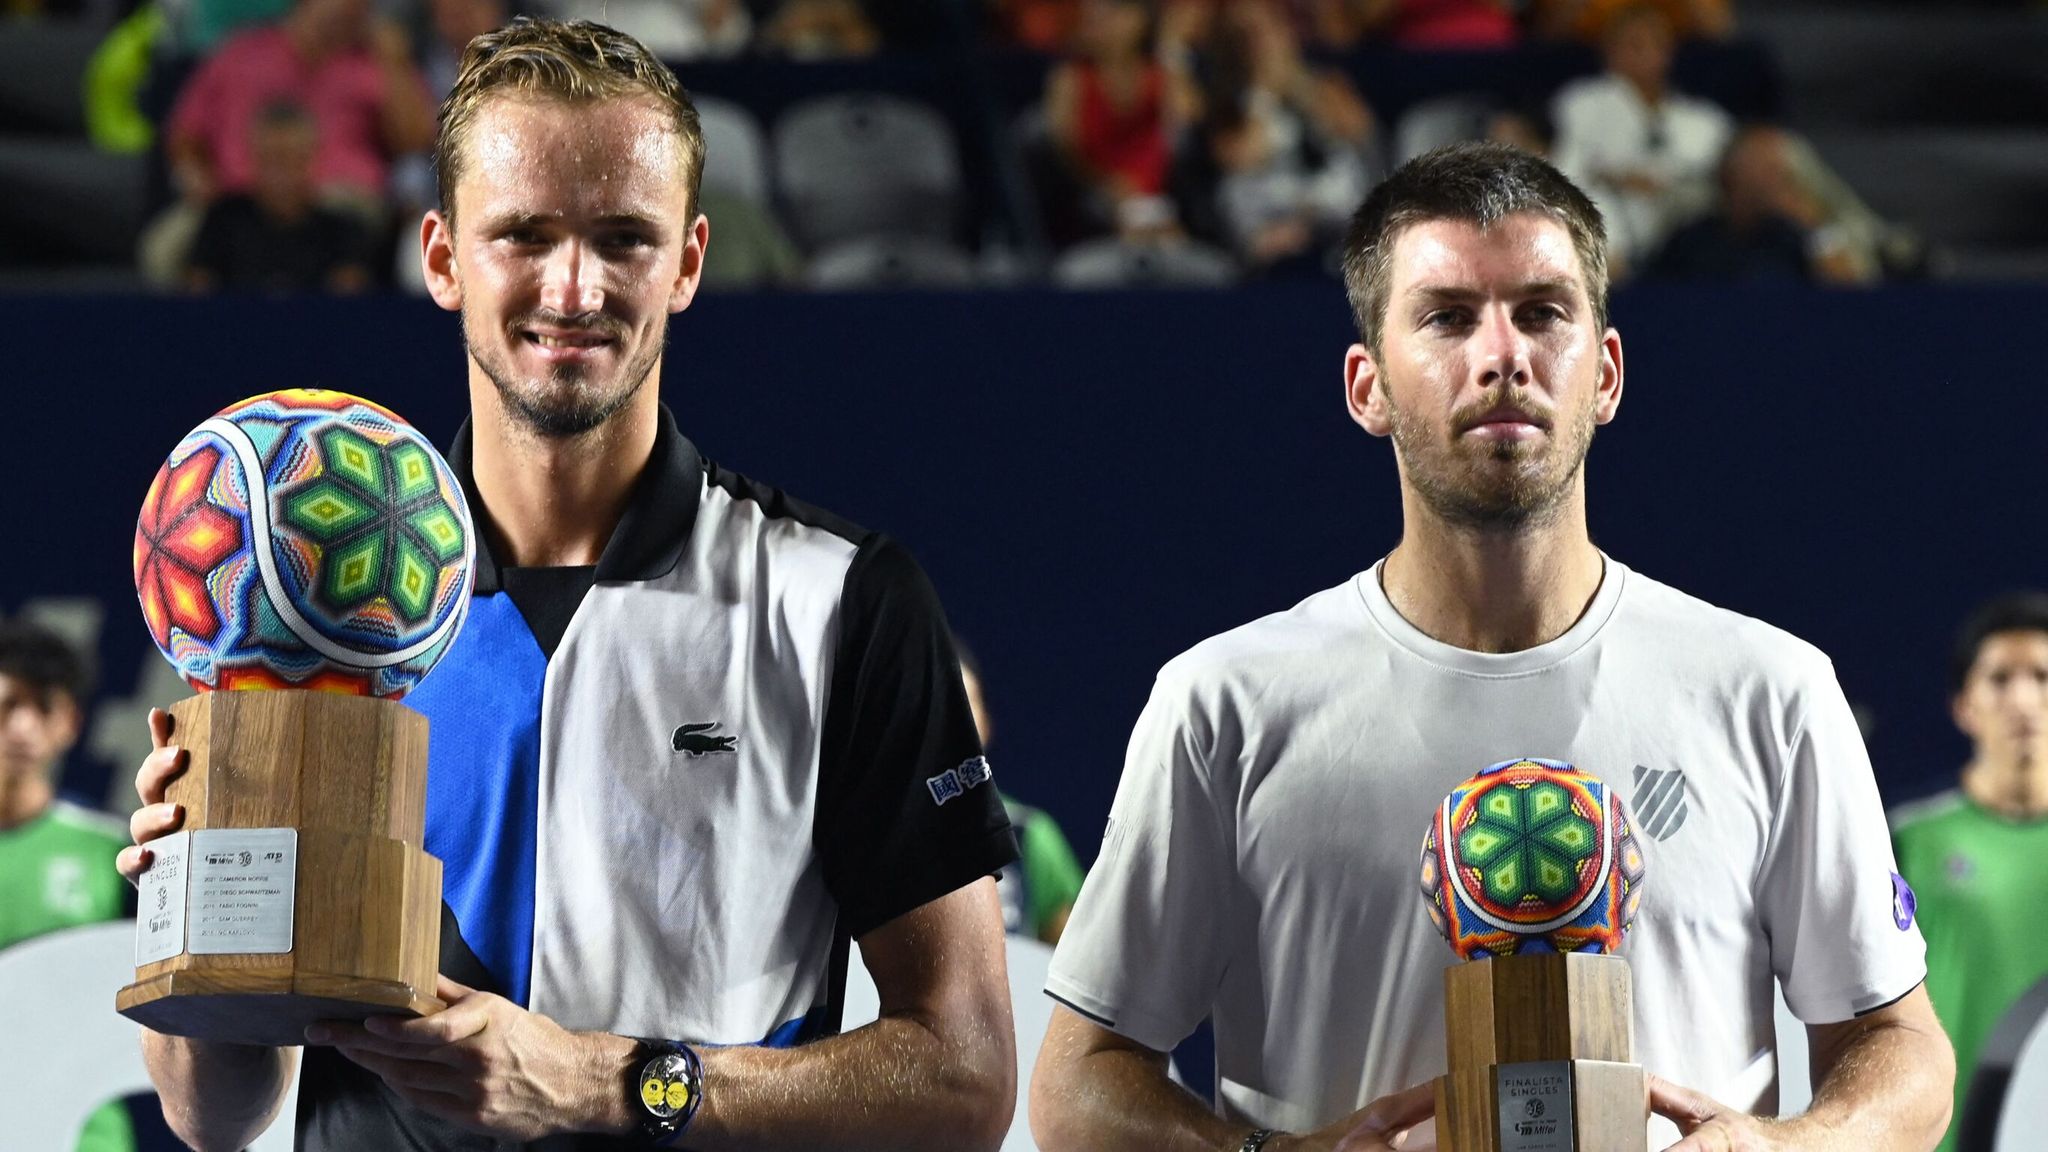 Daniil Medvedev beats Cameron Norrie 7-5 6-0 to claim Los Cabos Open title in Mexico Tennis News Sky Sports